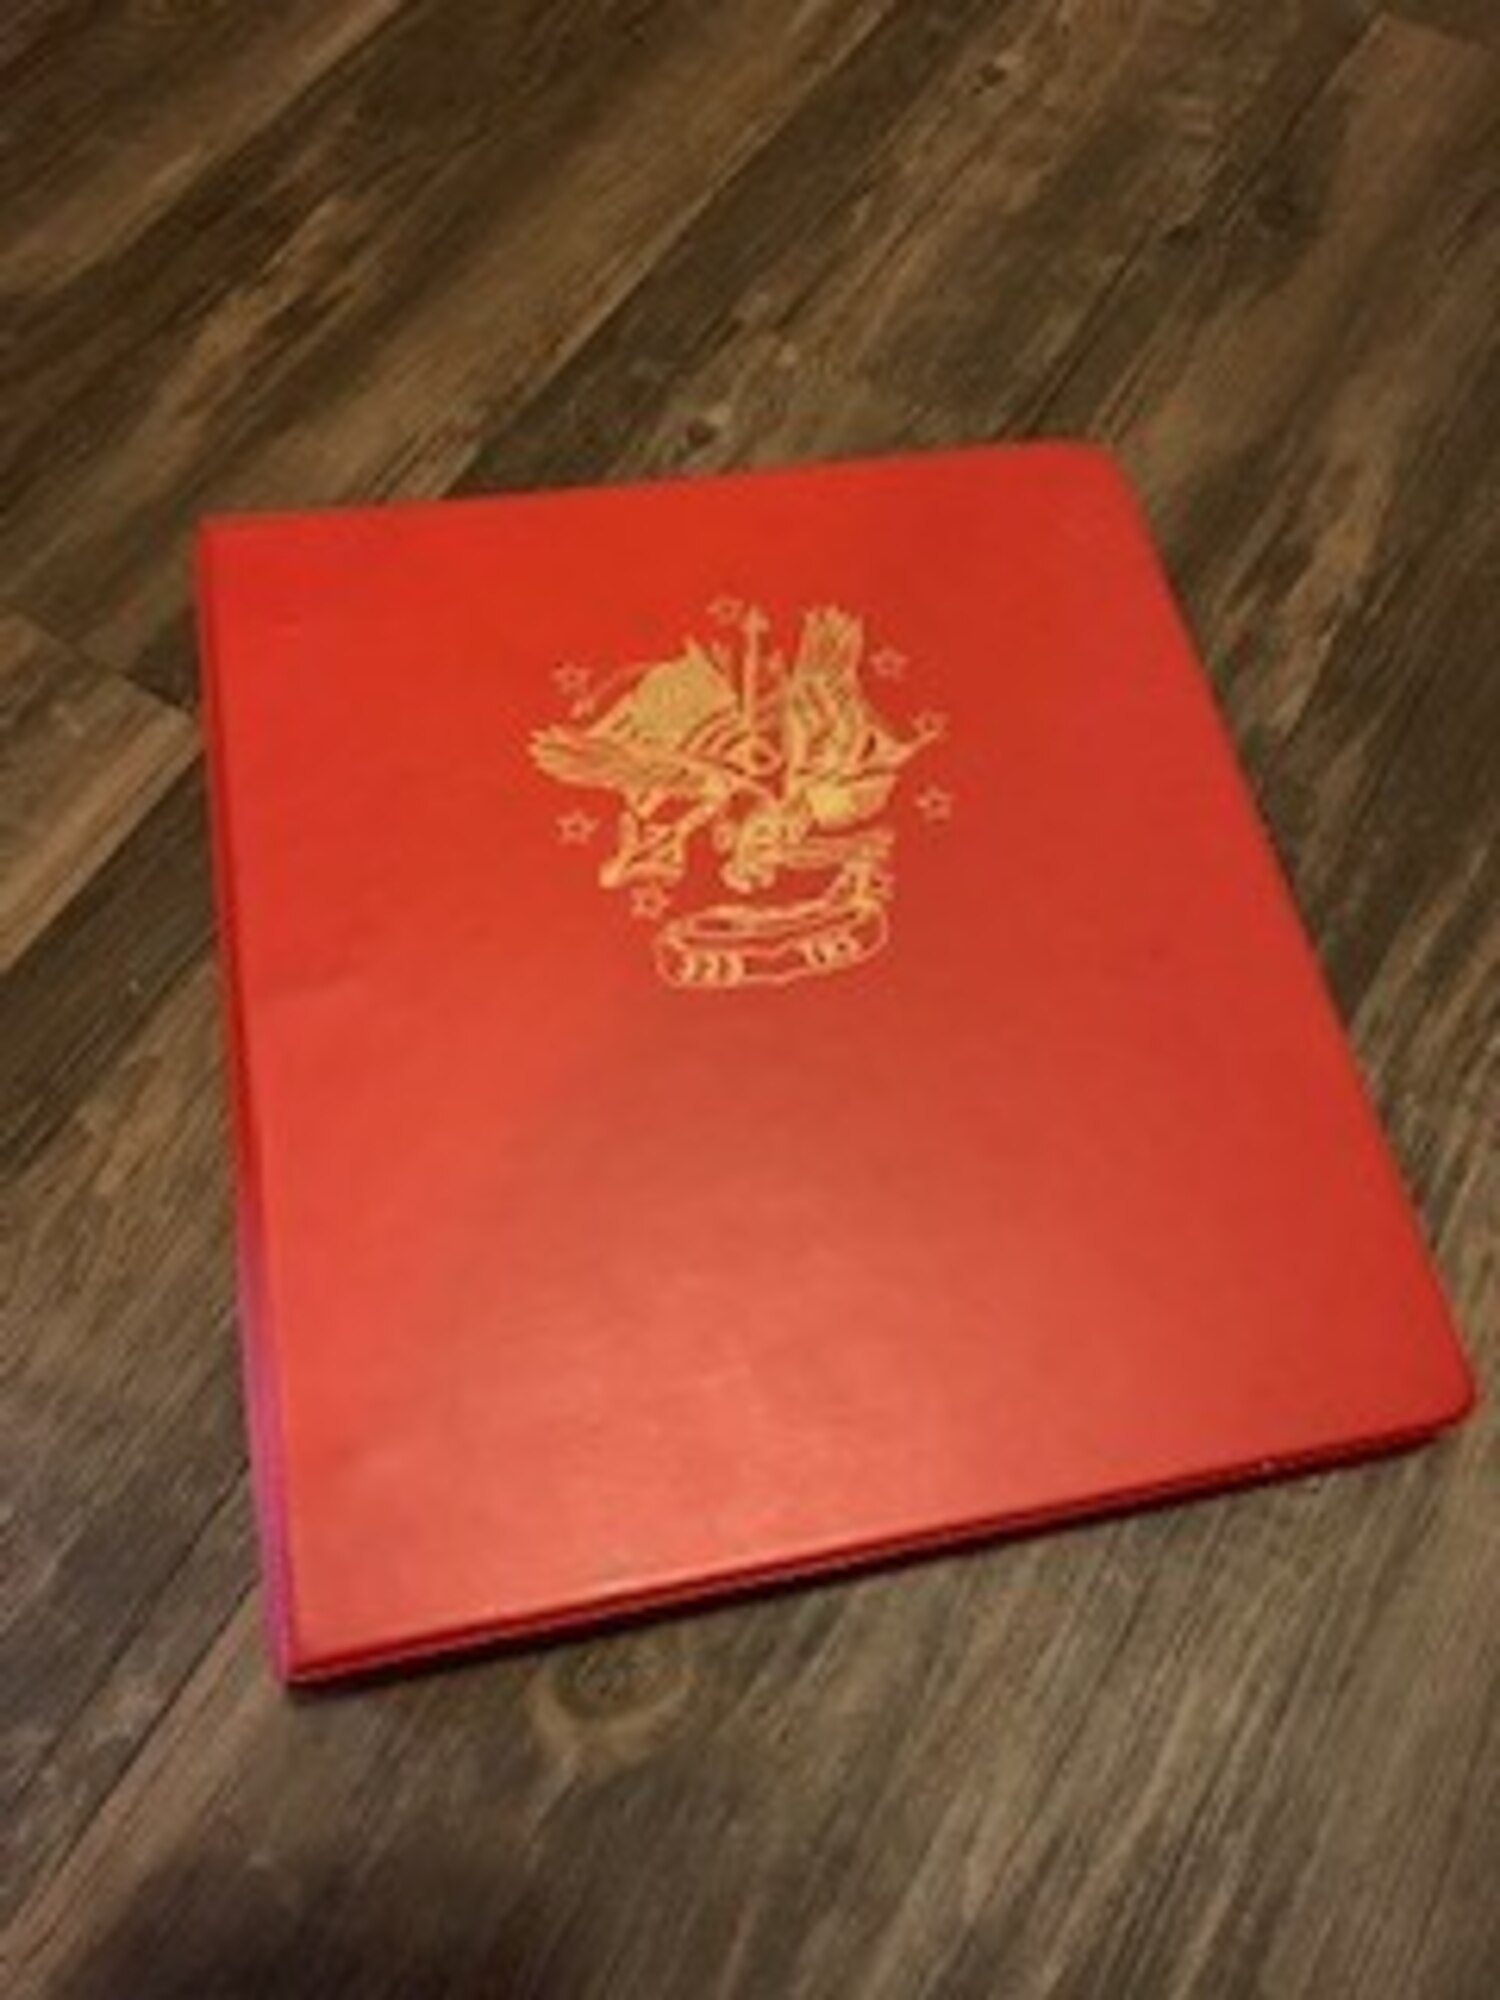 Courtesy photo of a red binder from basic training that kept personal letters from home for Tech. Sgt. Nyssa Curtis, Air Force Reserve Chaplain Assistant,